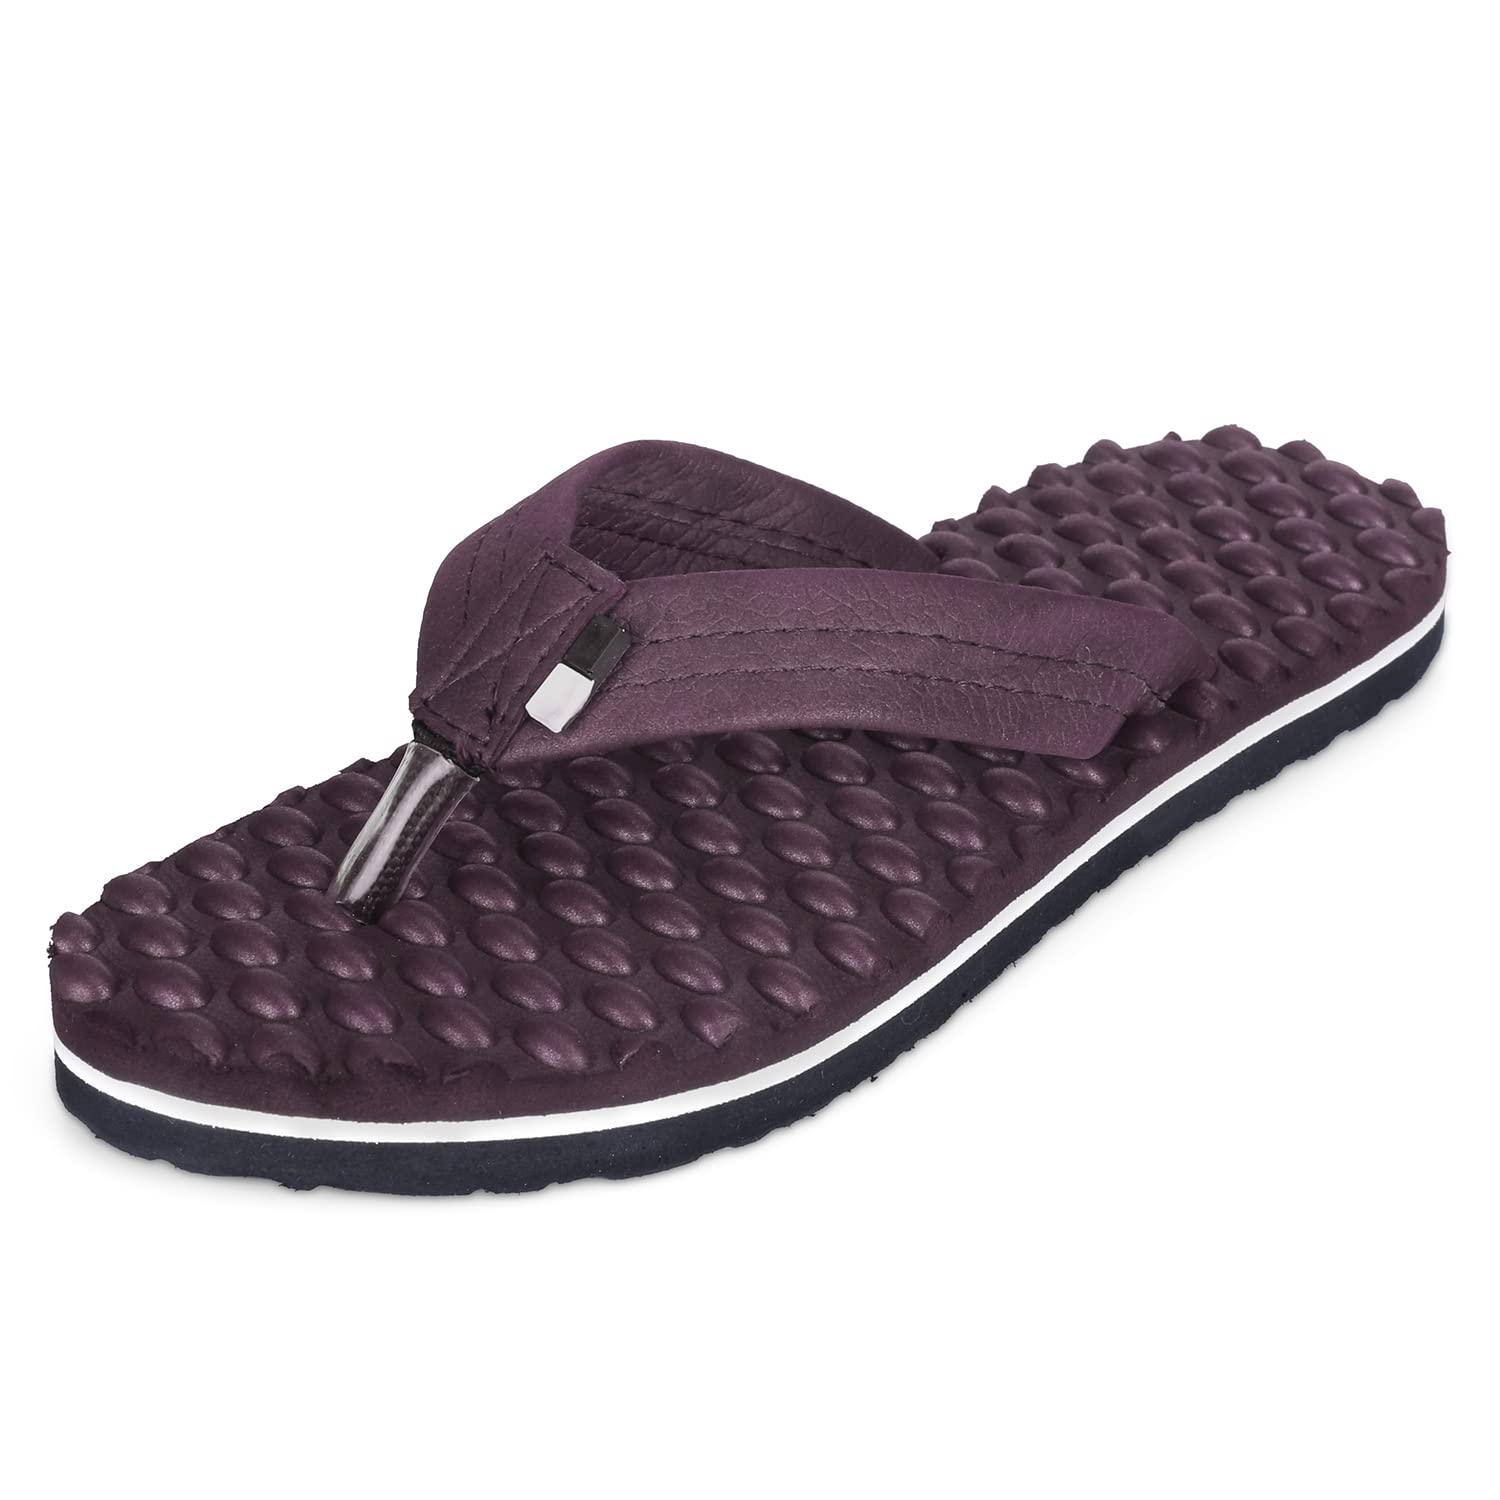 DOCTOR EXTRA SOFT House Slipper for Women's Care |Orthopaedic | Diabetic | Acupressure | Comfortable | MCR | Flip-Flop Ladies and Girl’s Home Slides for Daily Use D-20